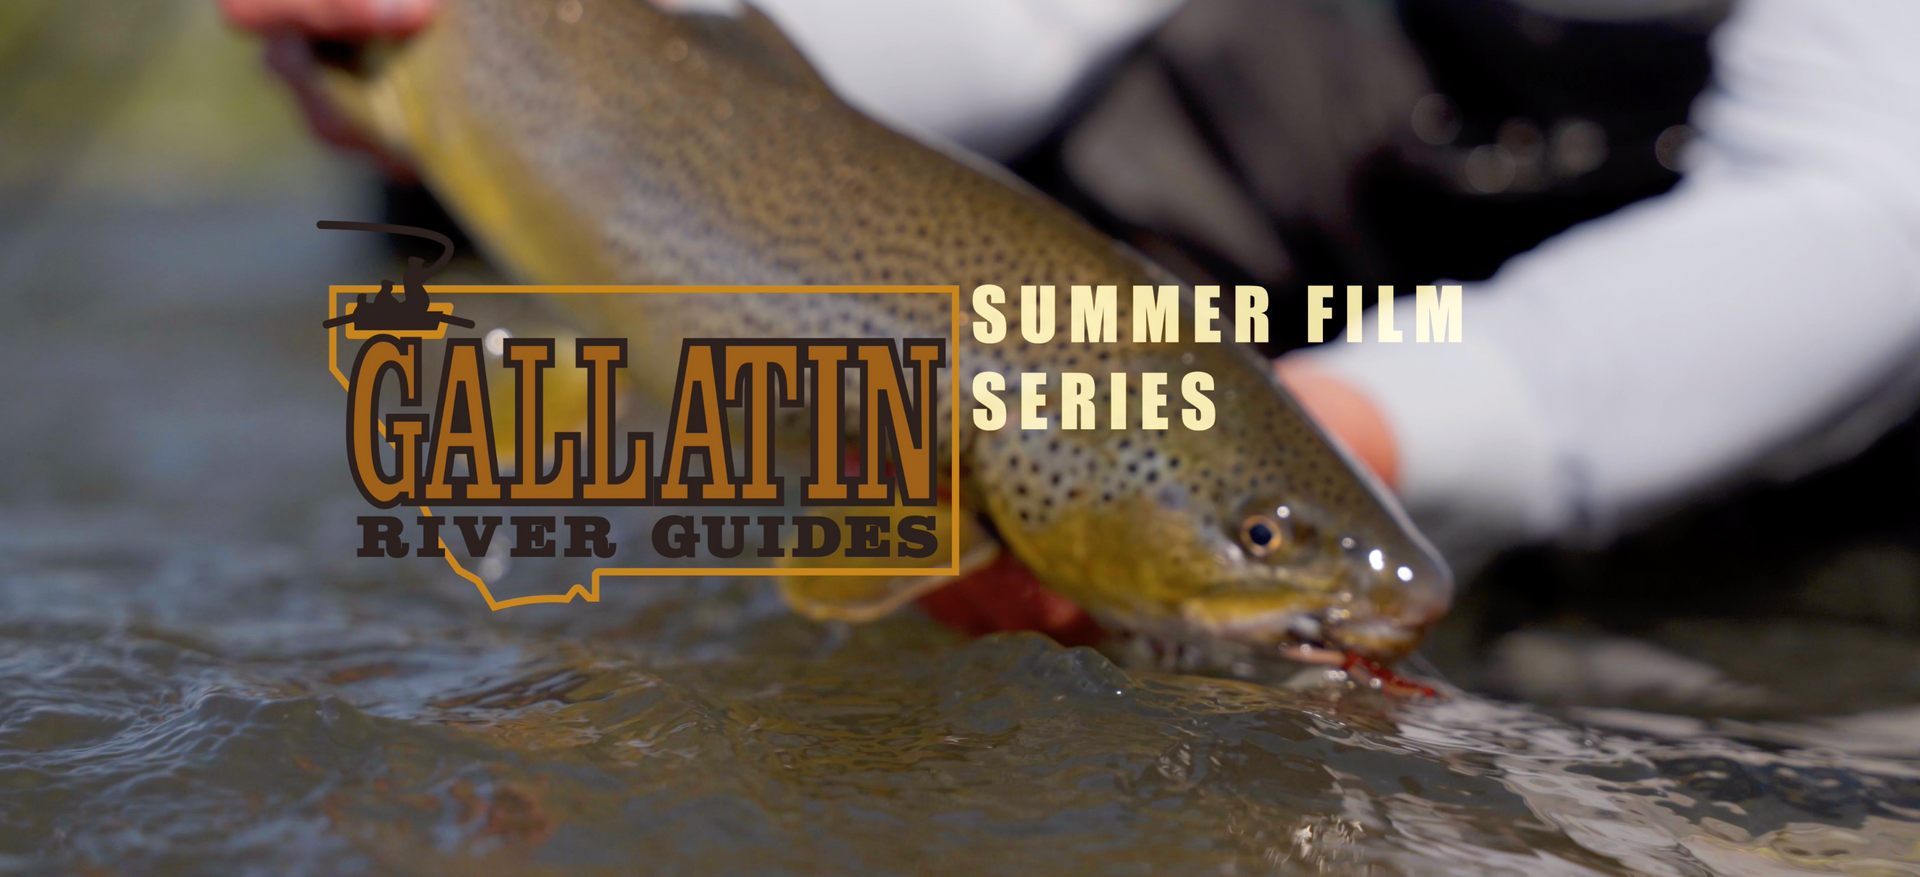 Thumbnail for youtube video of fisherman holding large brown trout